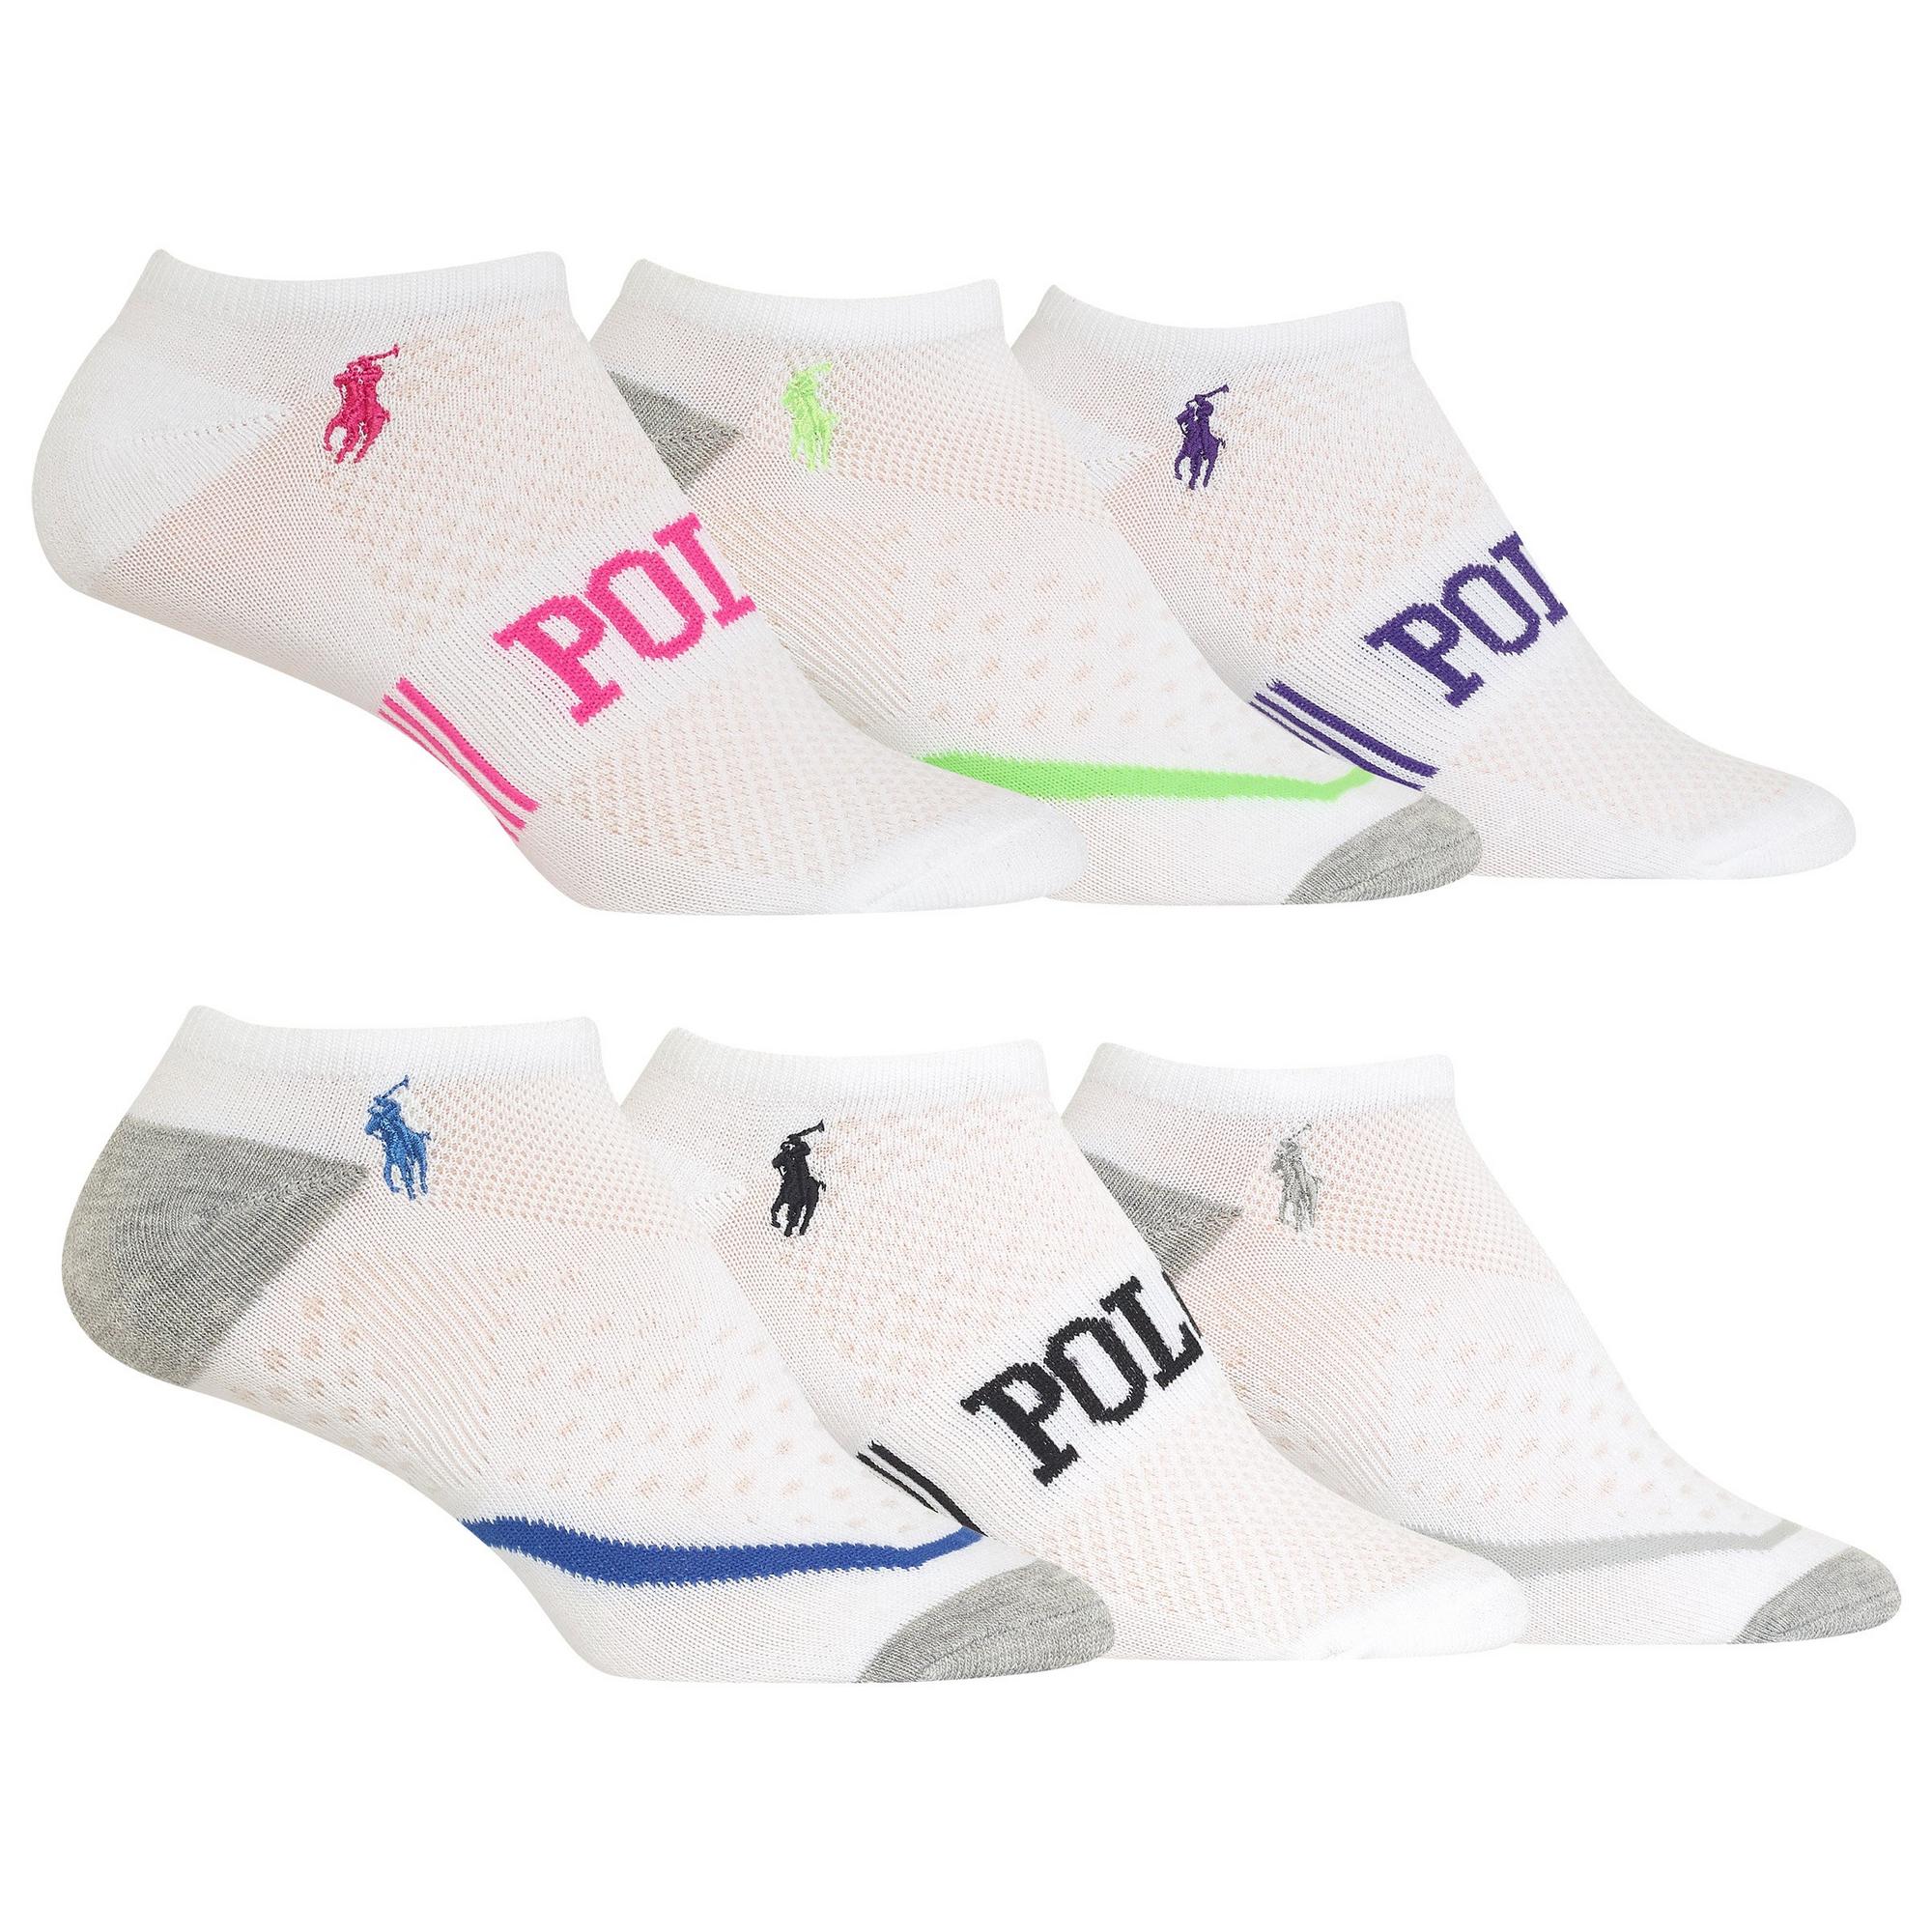 https://i1.adis.ws/i/golftown/40135036_0/Women's%20Arch%20Support%20Low%20Cut%20Sock-6%20Pack?$default$